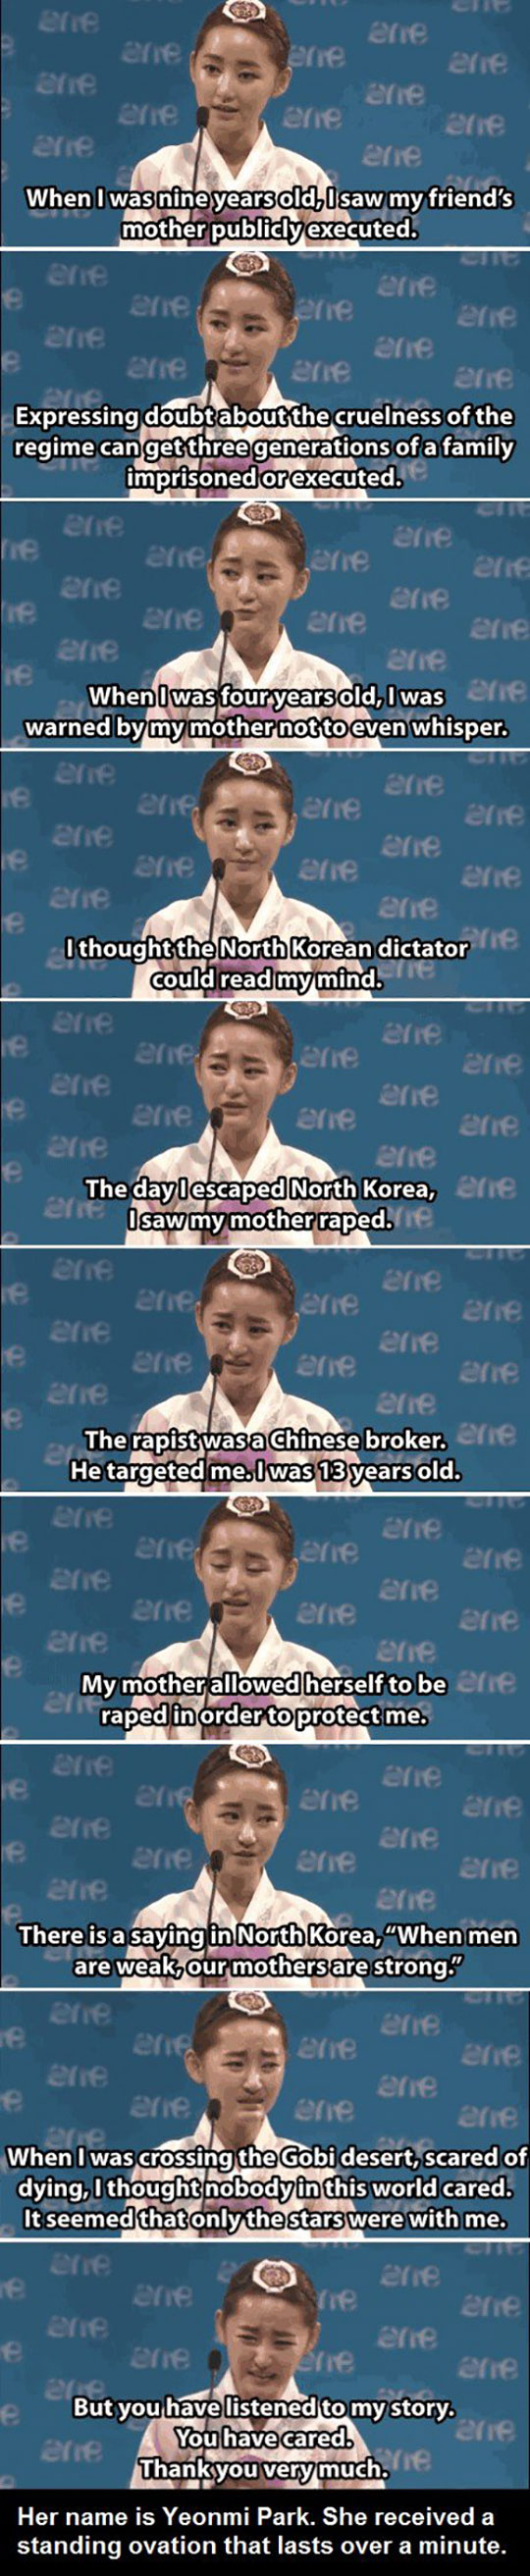 Her name is Yeonmi Park.